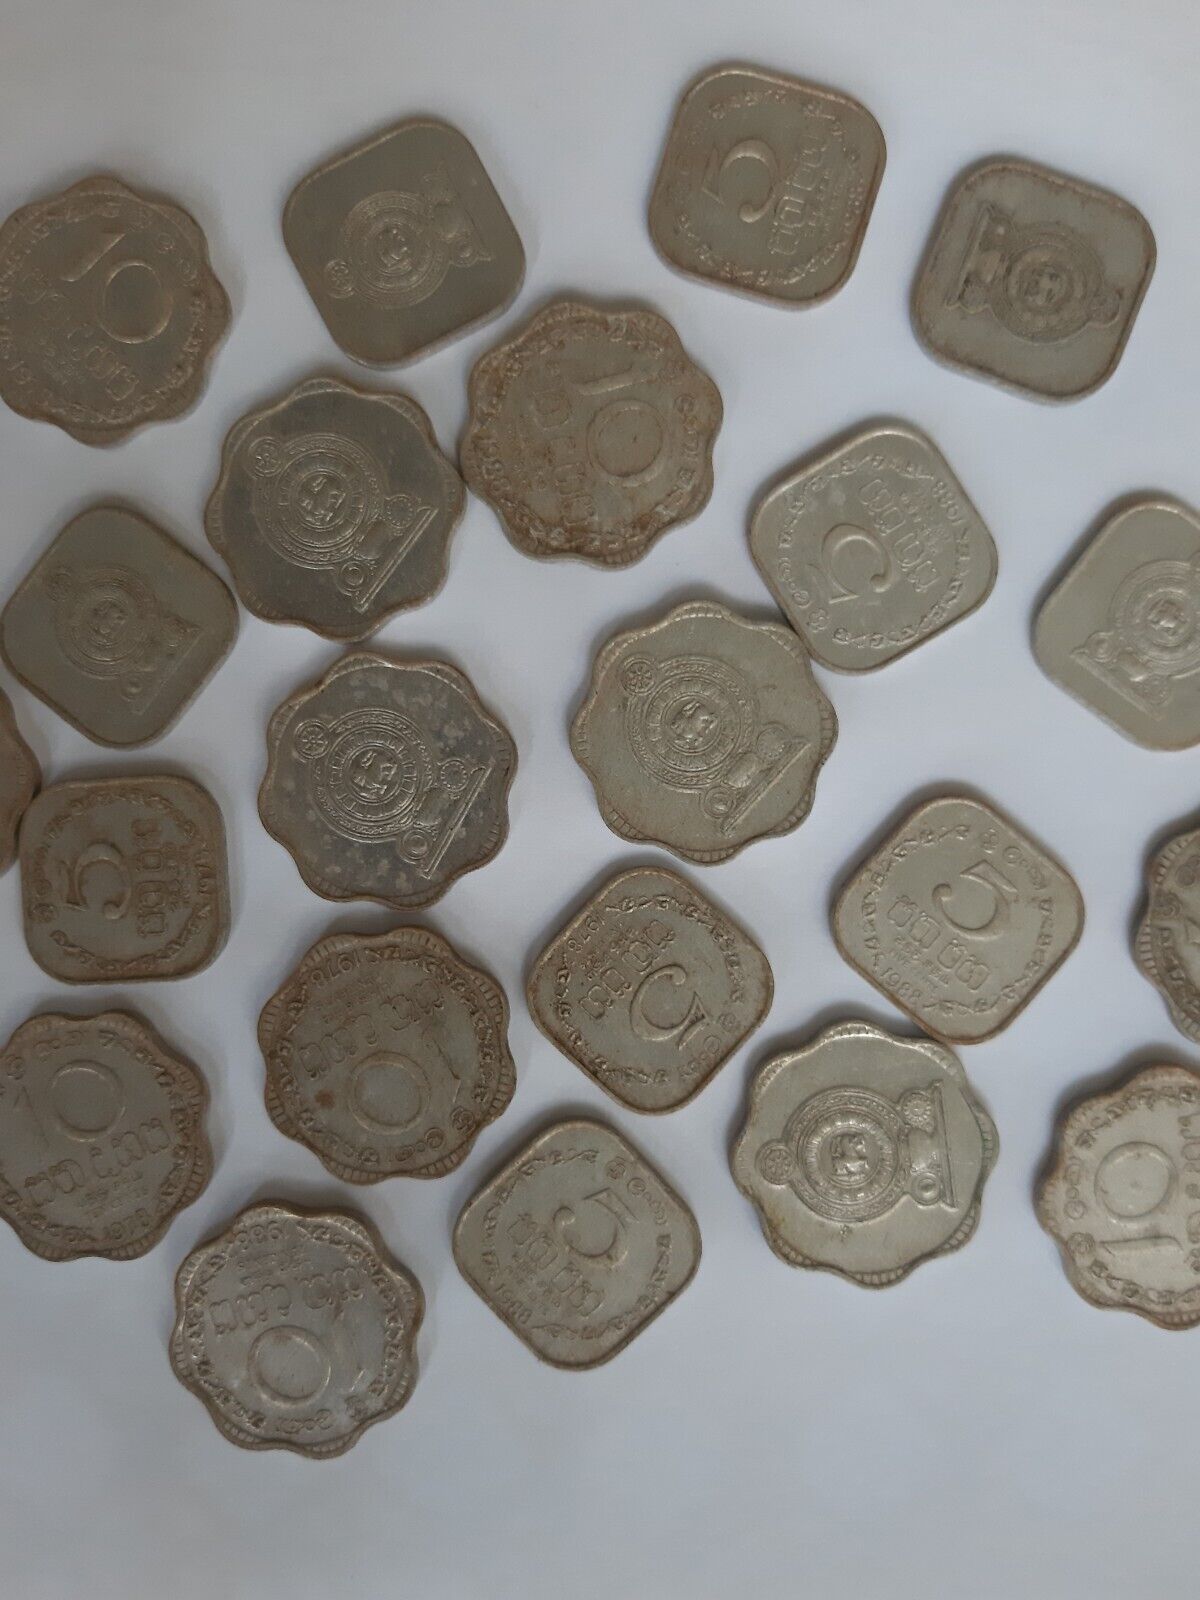 SRI LANKAN COINS. SOUTH ASIA ISLAND. OLD COLLECTIBLE MONEY RUPEES 10 CENTS Без бренда